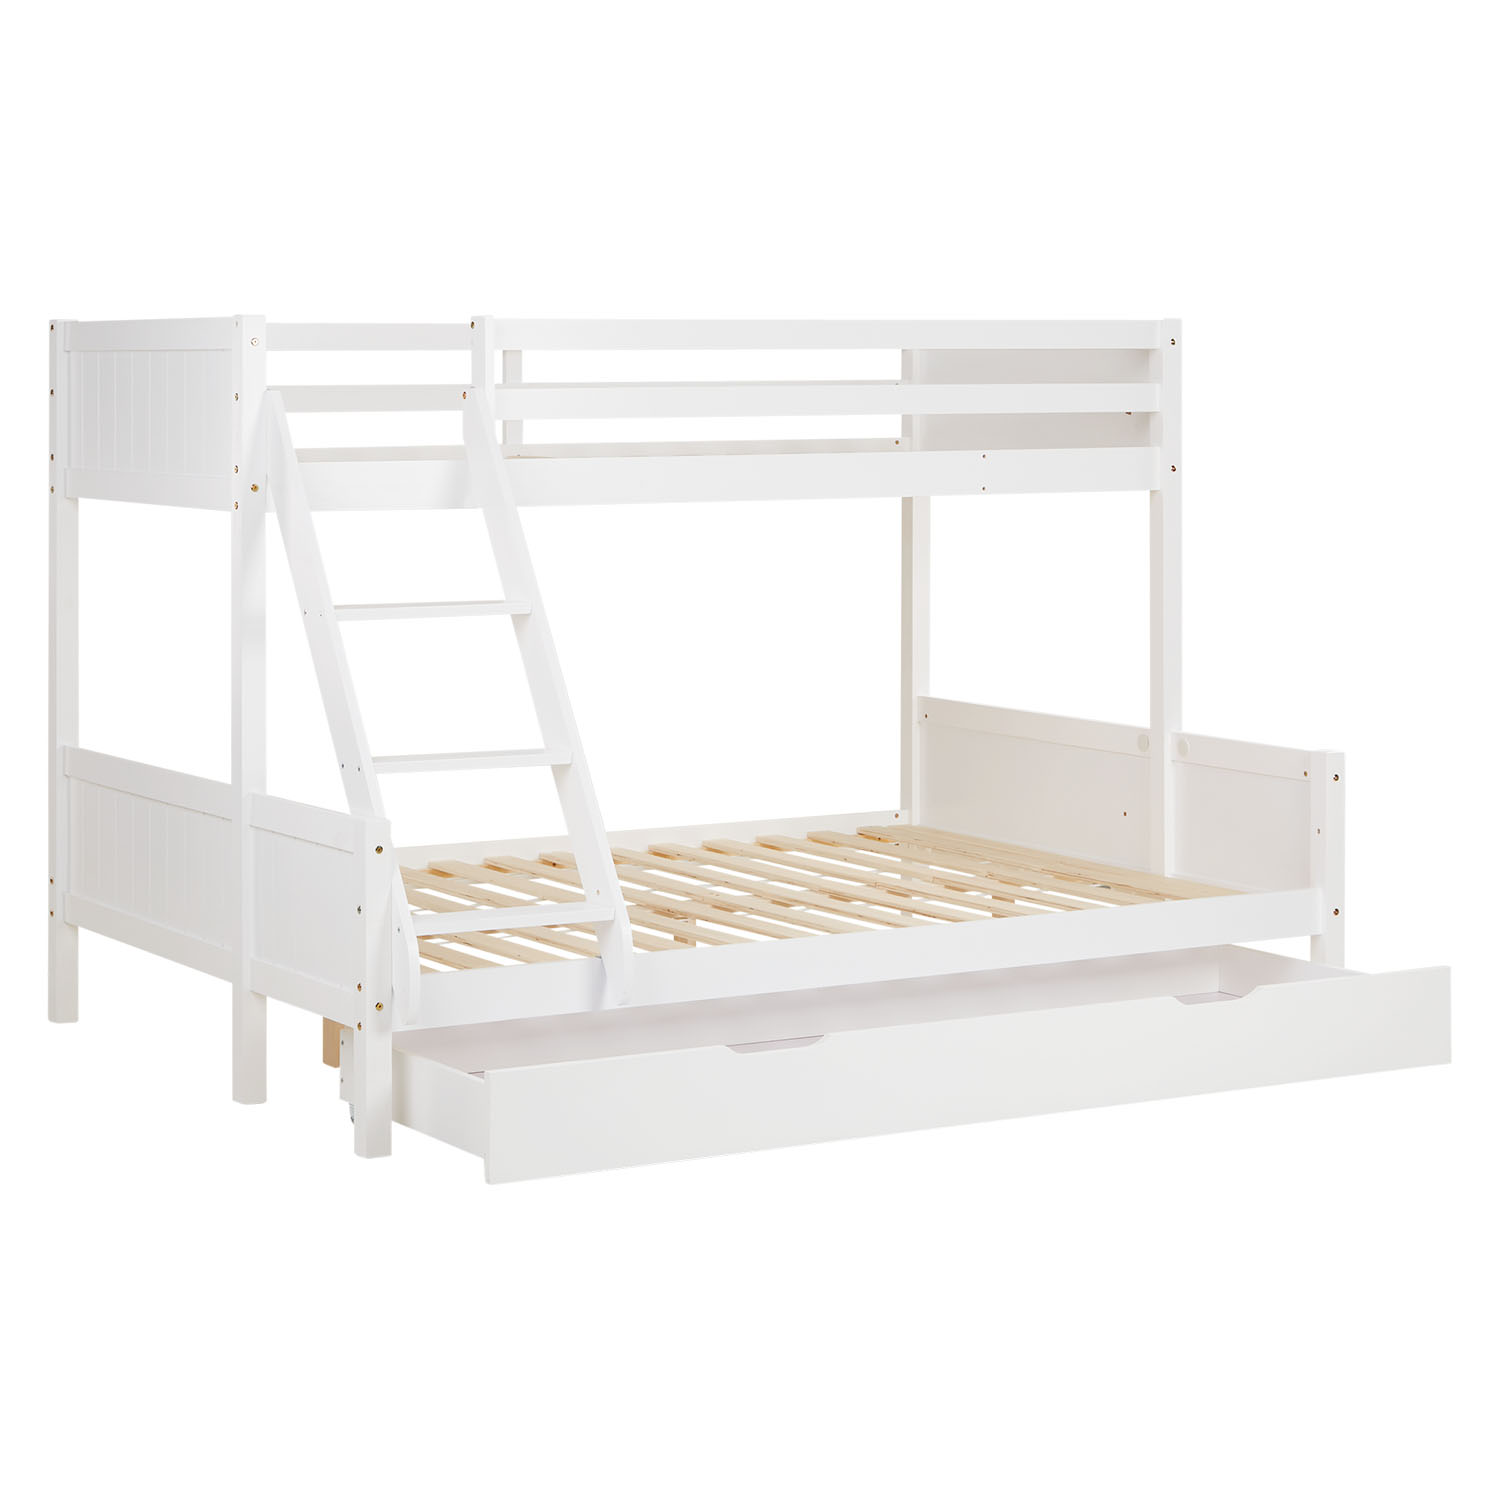 Bunk Bed with 2 Mattresses Kids Bed 90x200 and 140x200 cm White Wood Cabin Bed High Sleeper Bed Loft Bed Childrens Bed Twin Bed Drawer